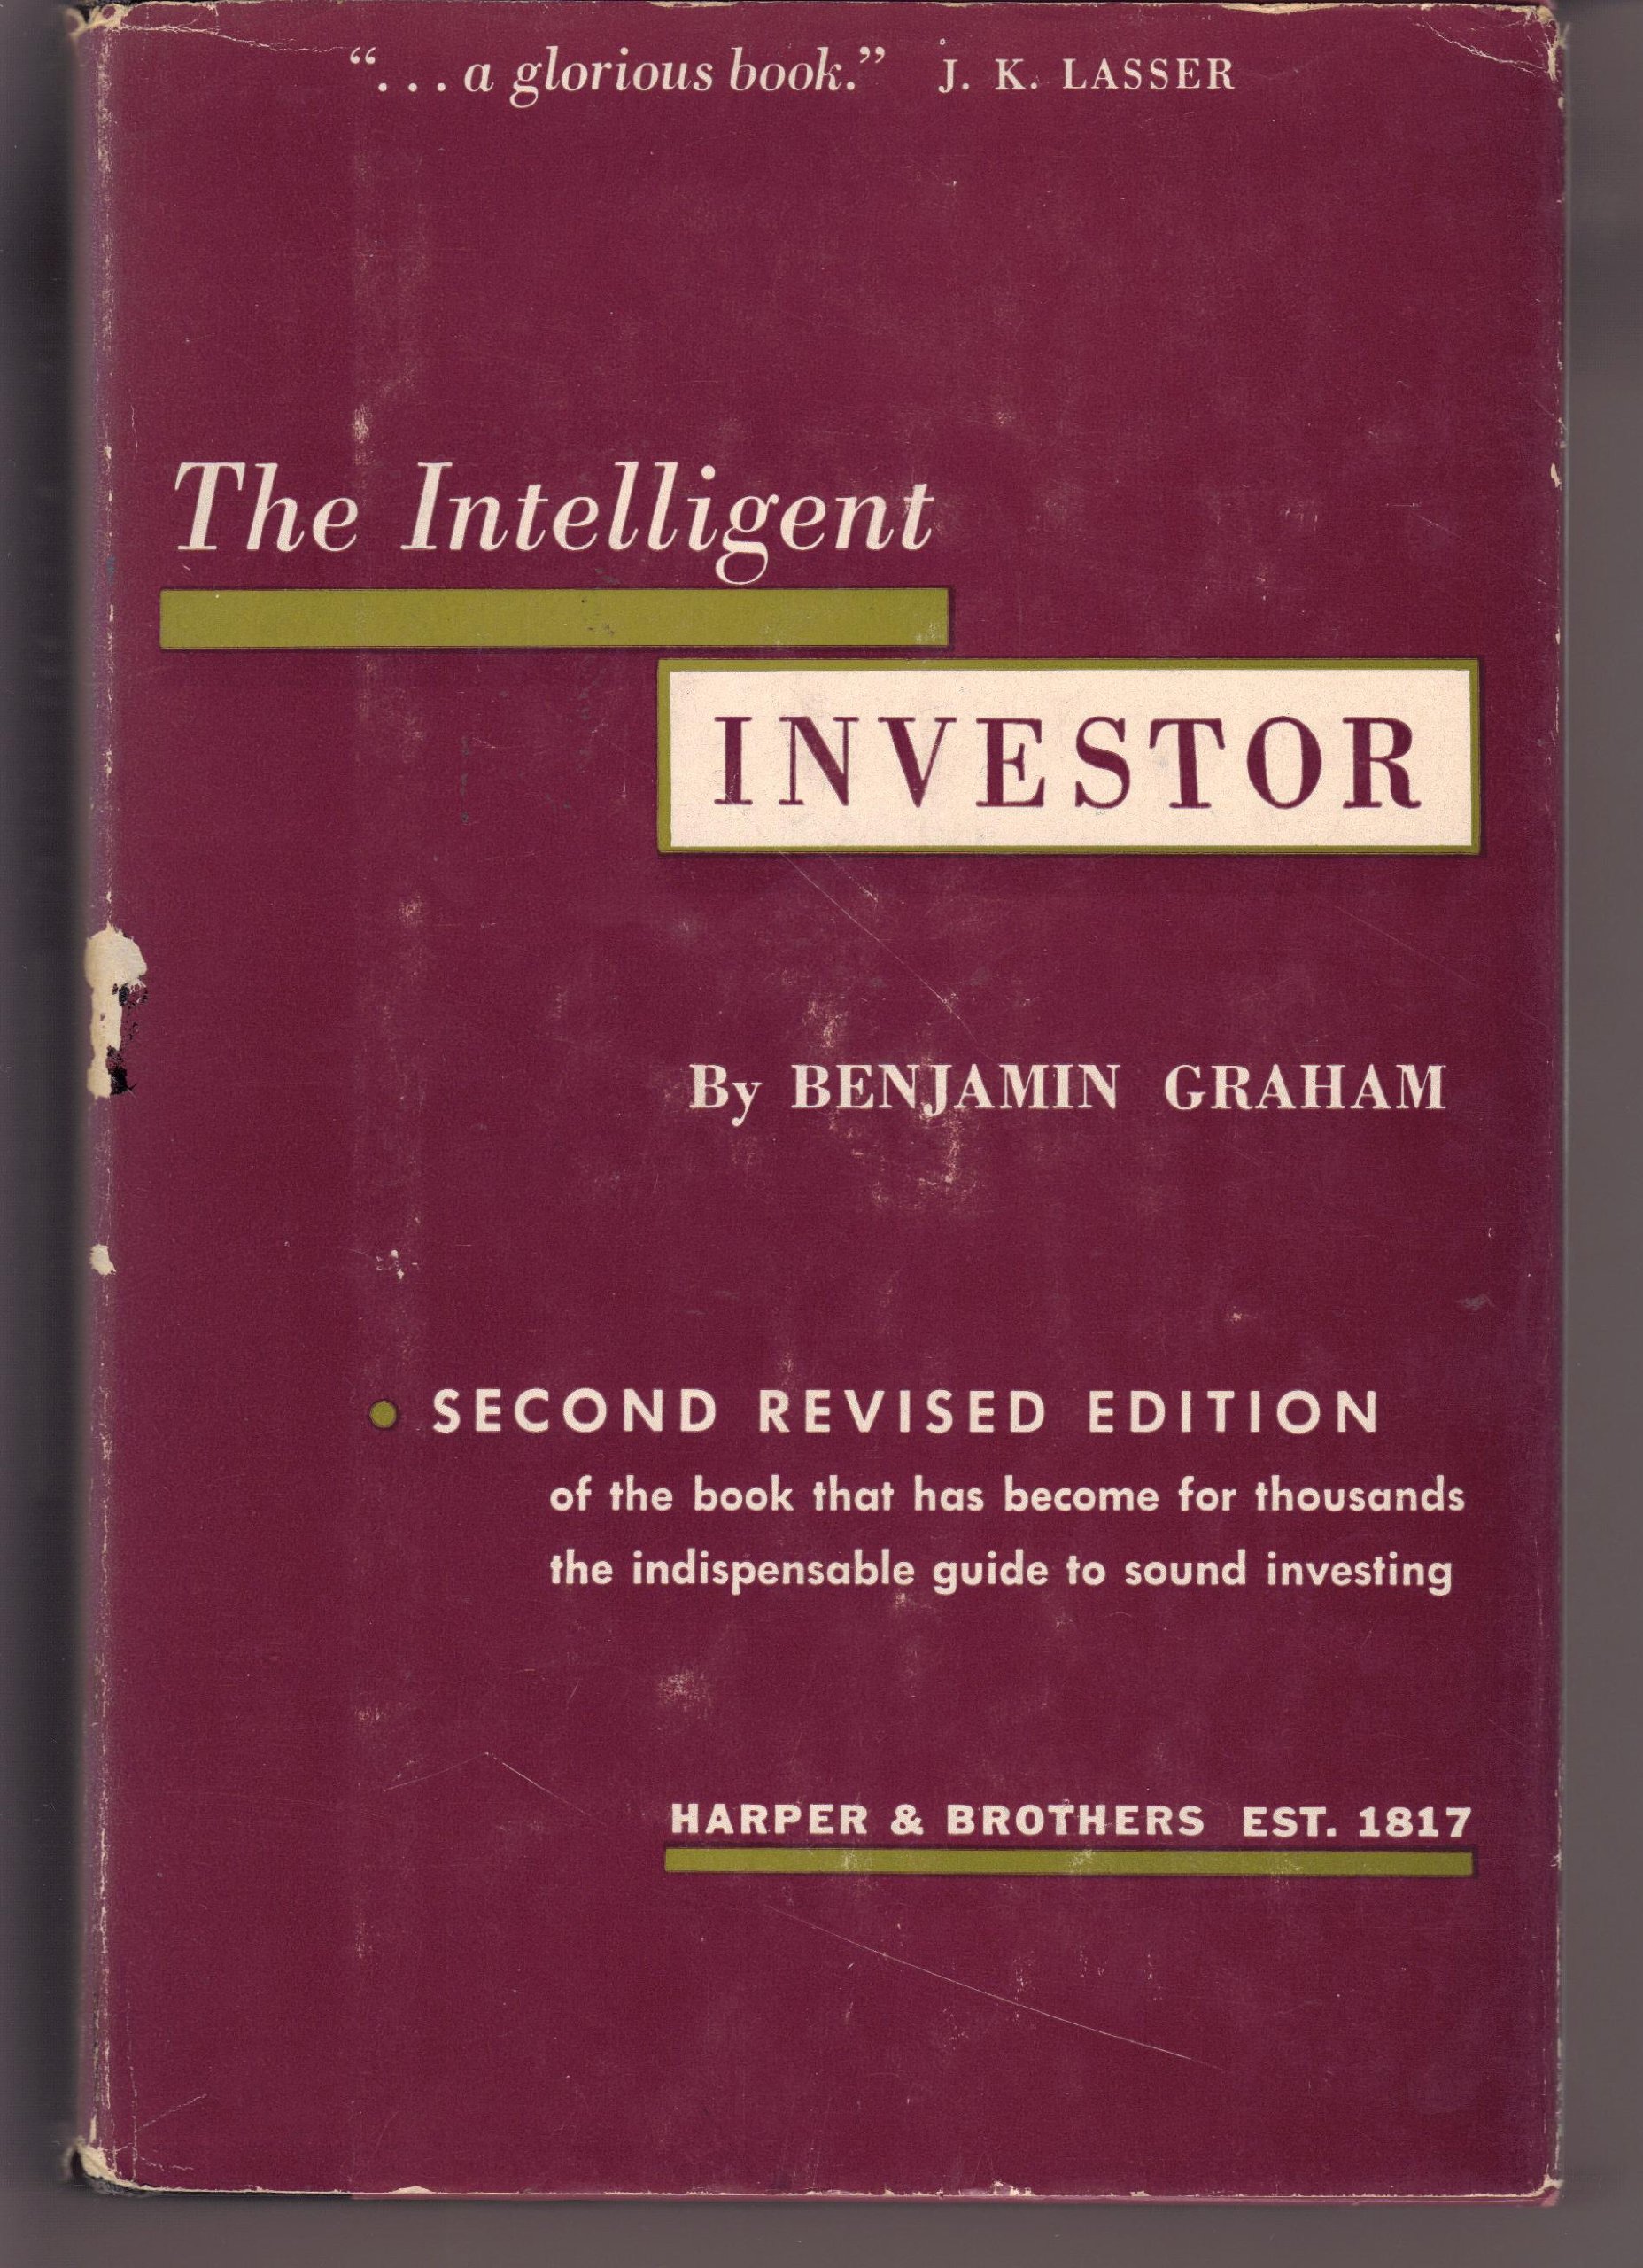 The Intelligent Investor Second Revised Edition